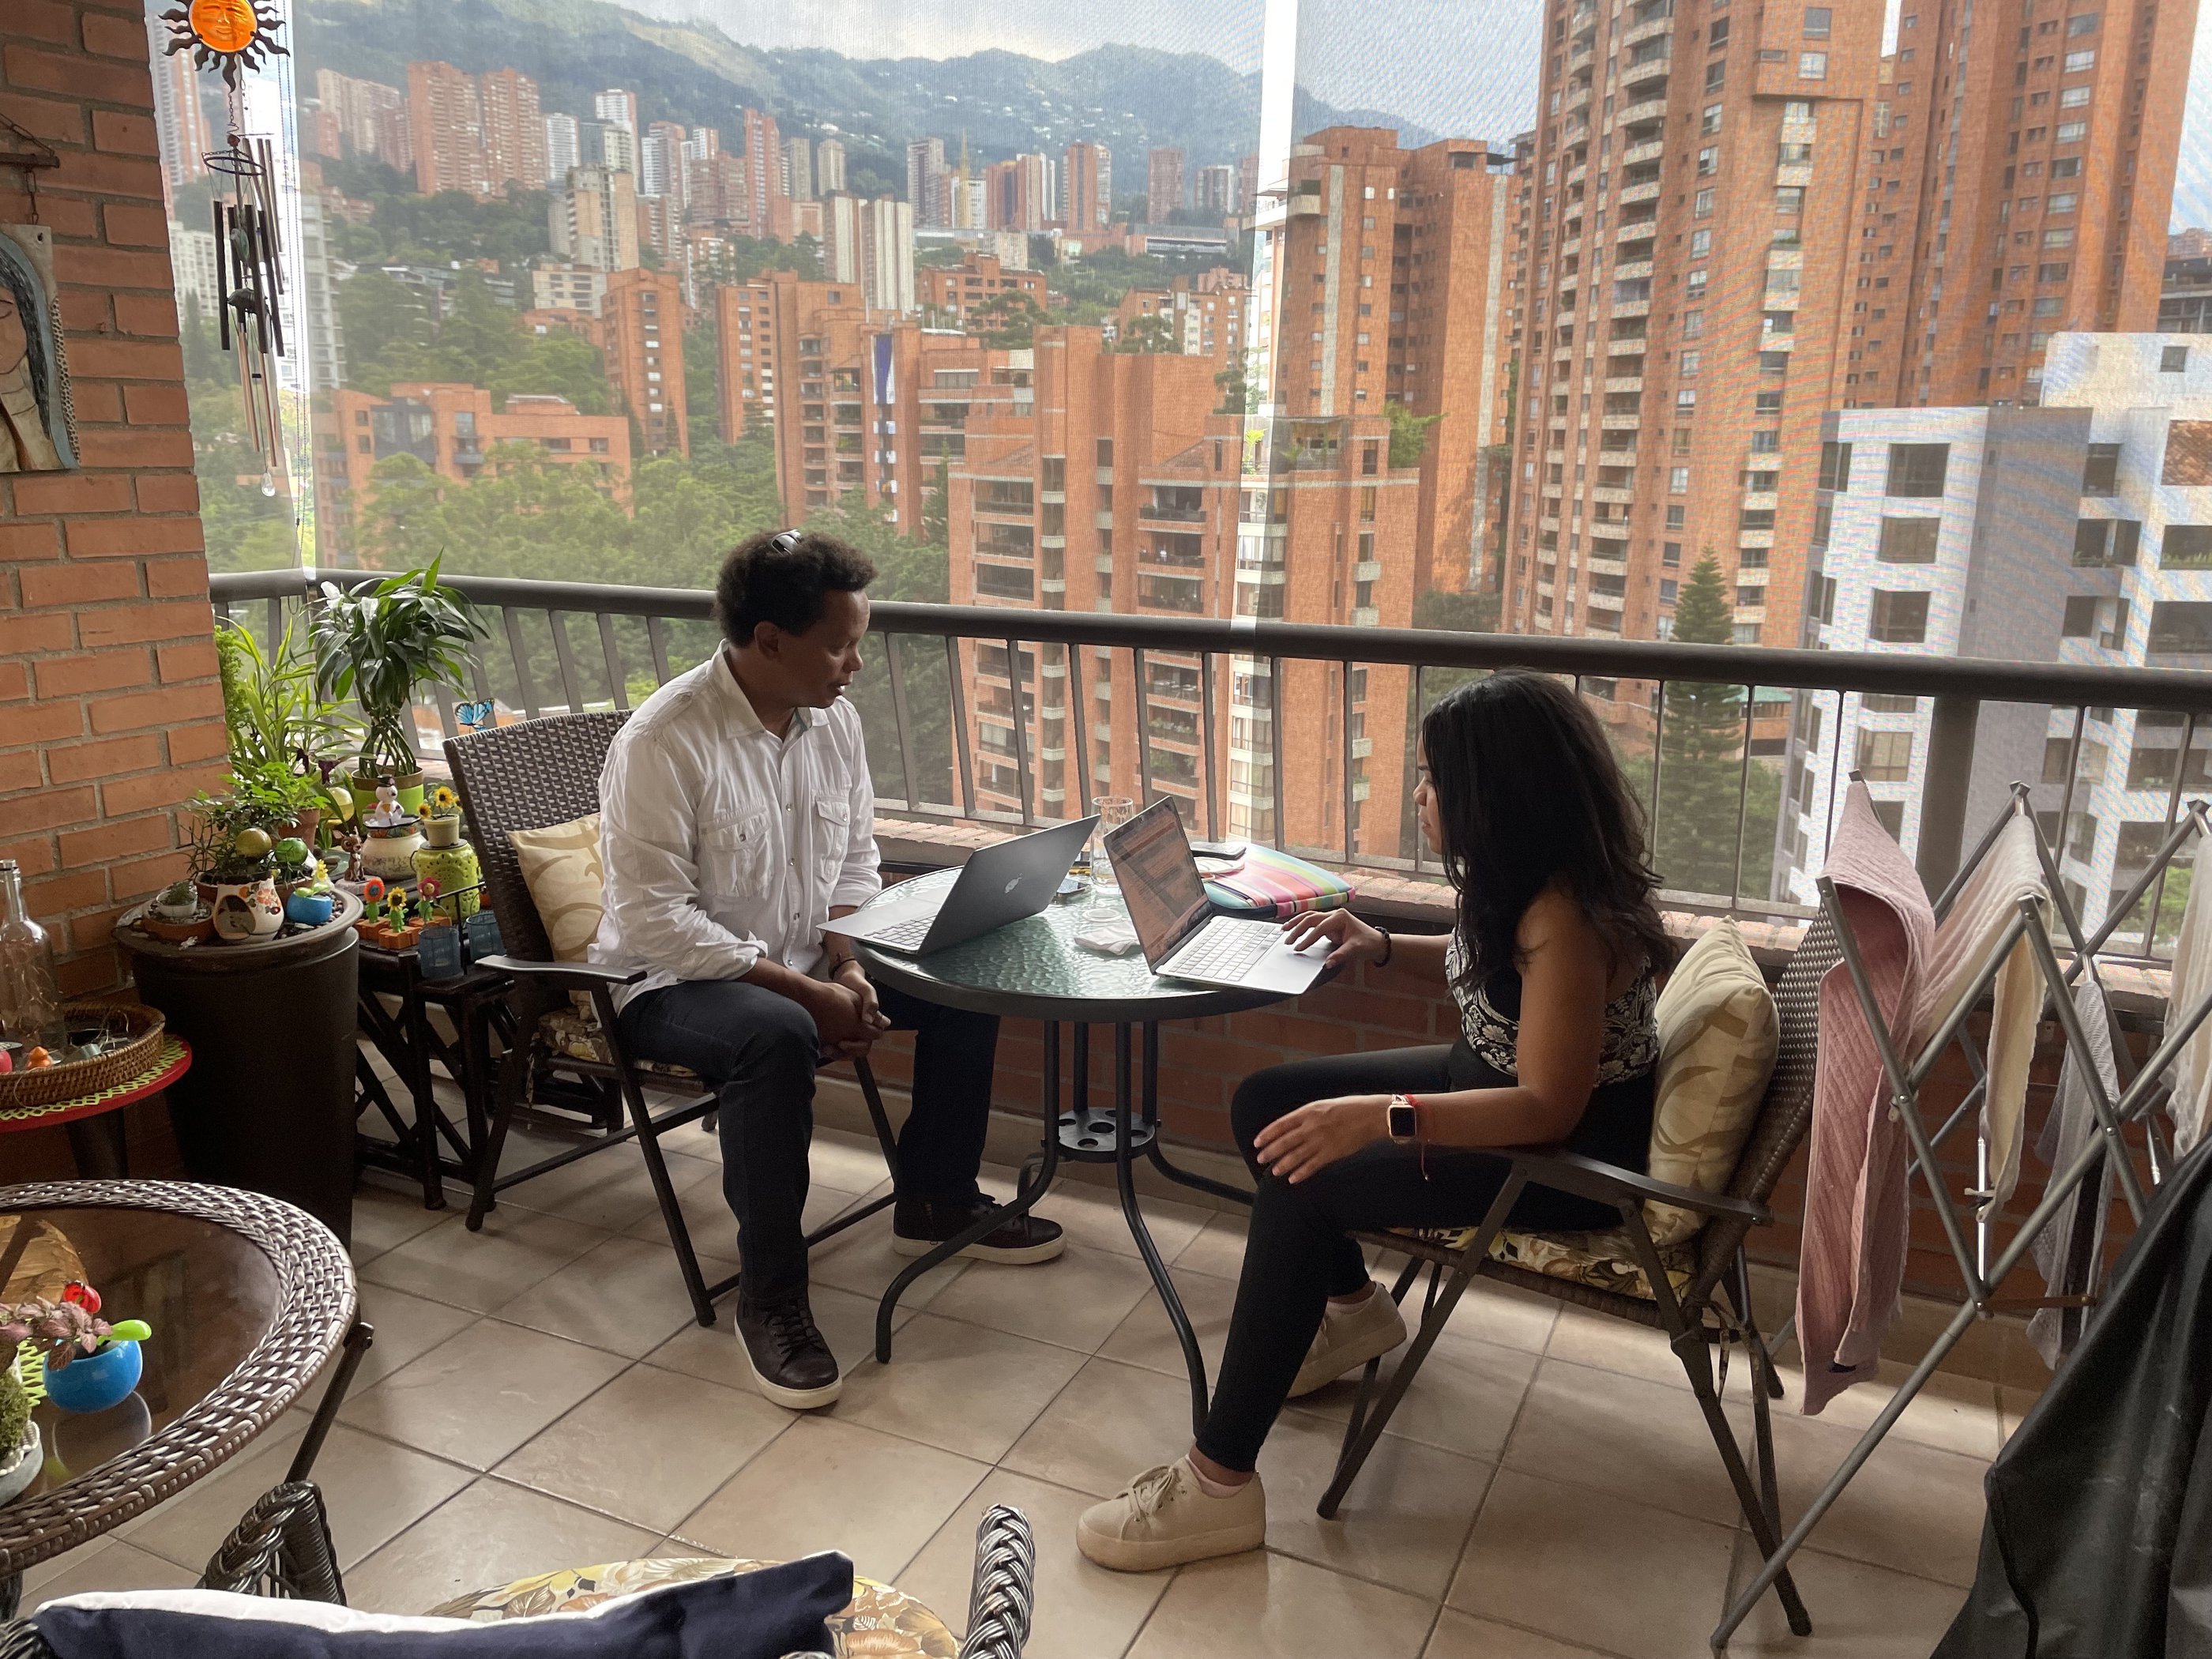 Two people sitting a bistro like table on a balcony overlooking city buildings. Mountainous views in the background 